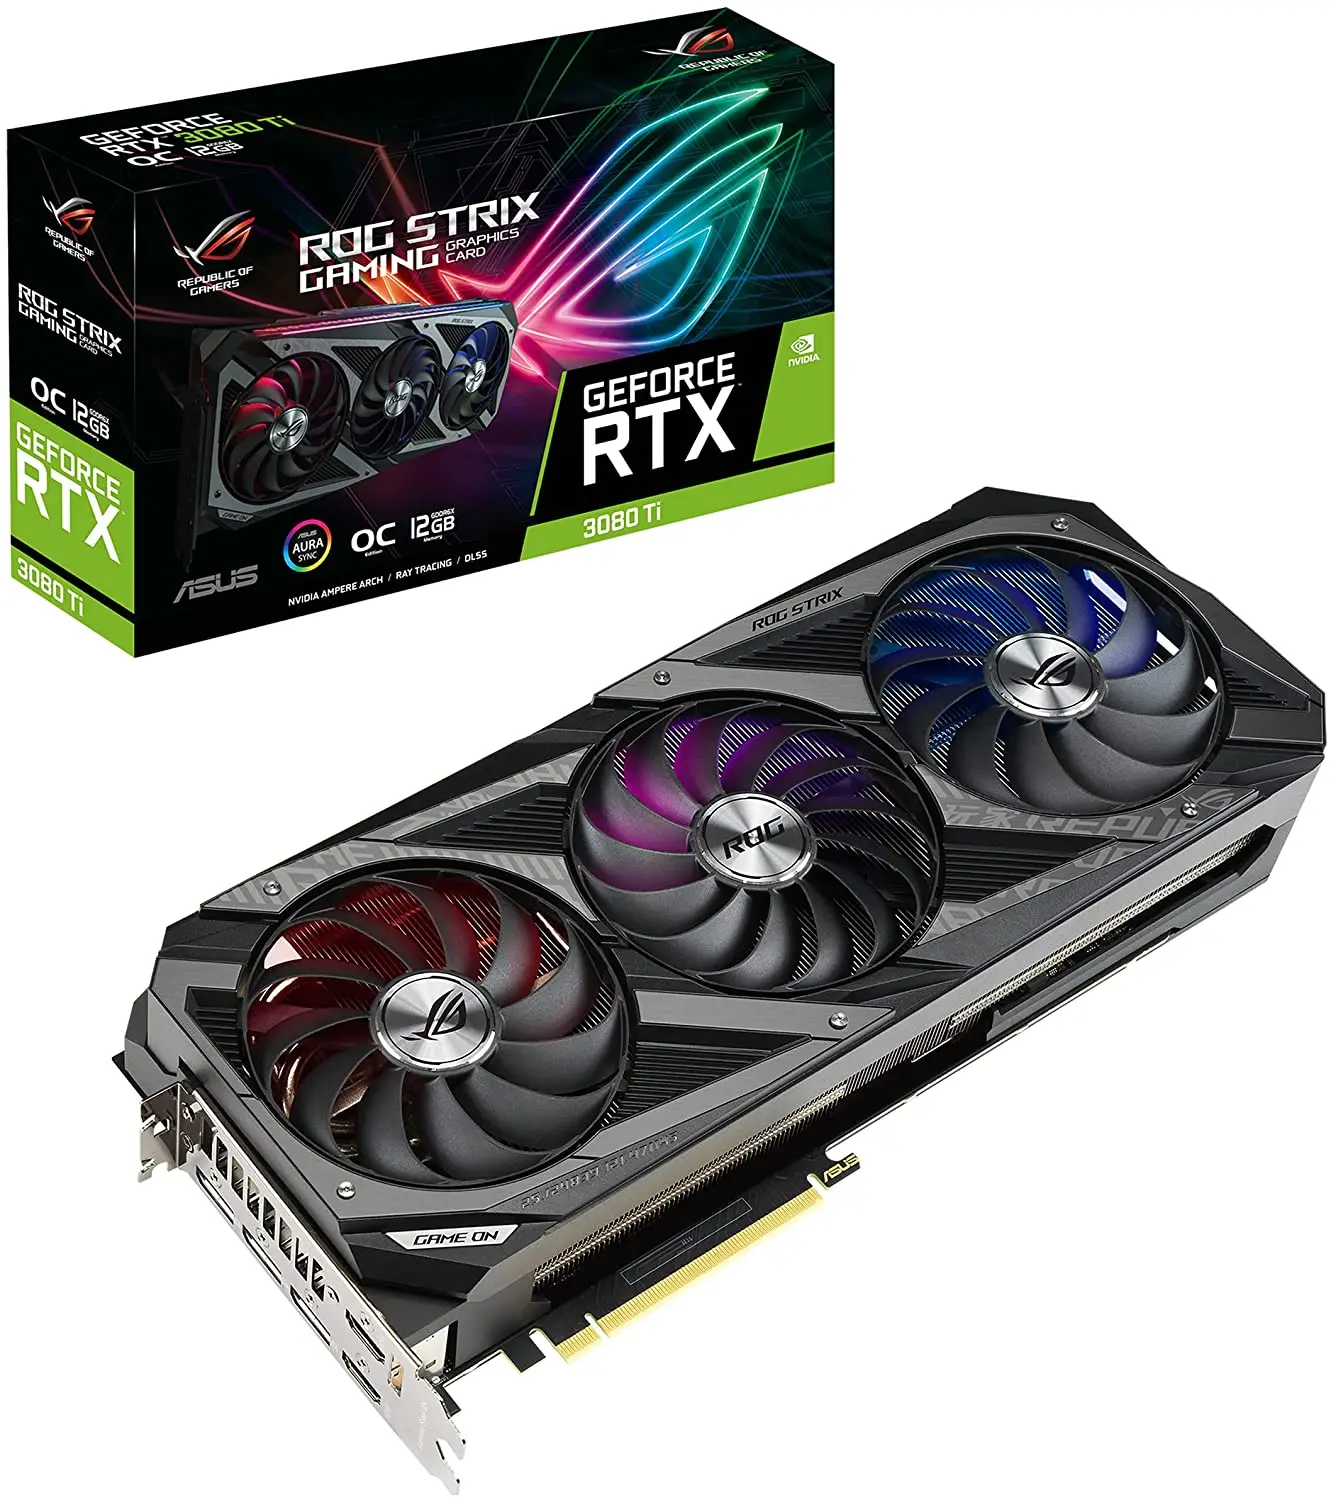 

AMAZING DEAL AND NEWLY ARRIVE ASUS ROG Strix NVIDIA GeForce RTX 3080 Ti OC Edition Gaming Graphics Card (PCIe 4.0, 12GB GDDR6X,